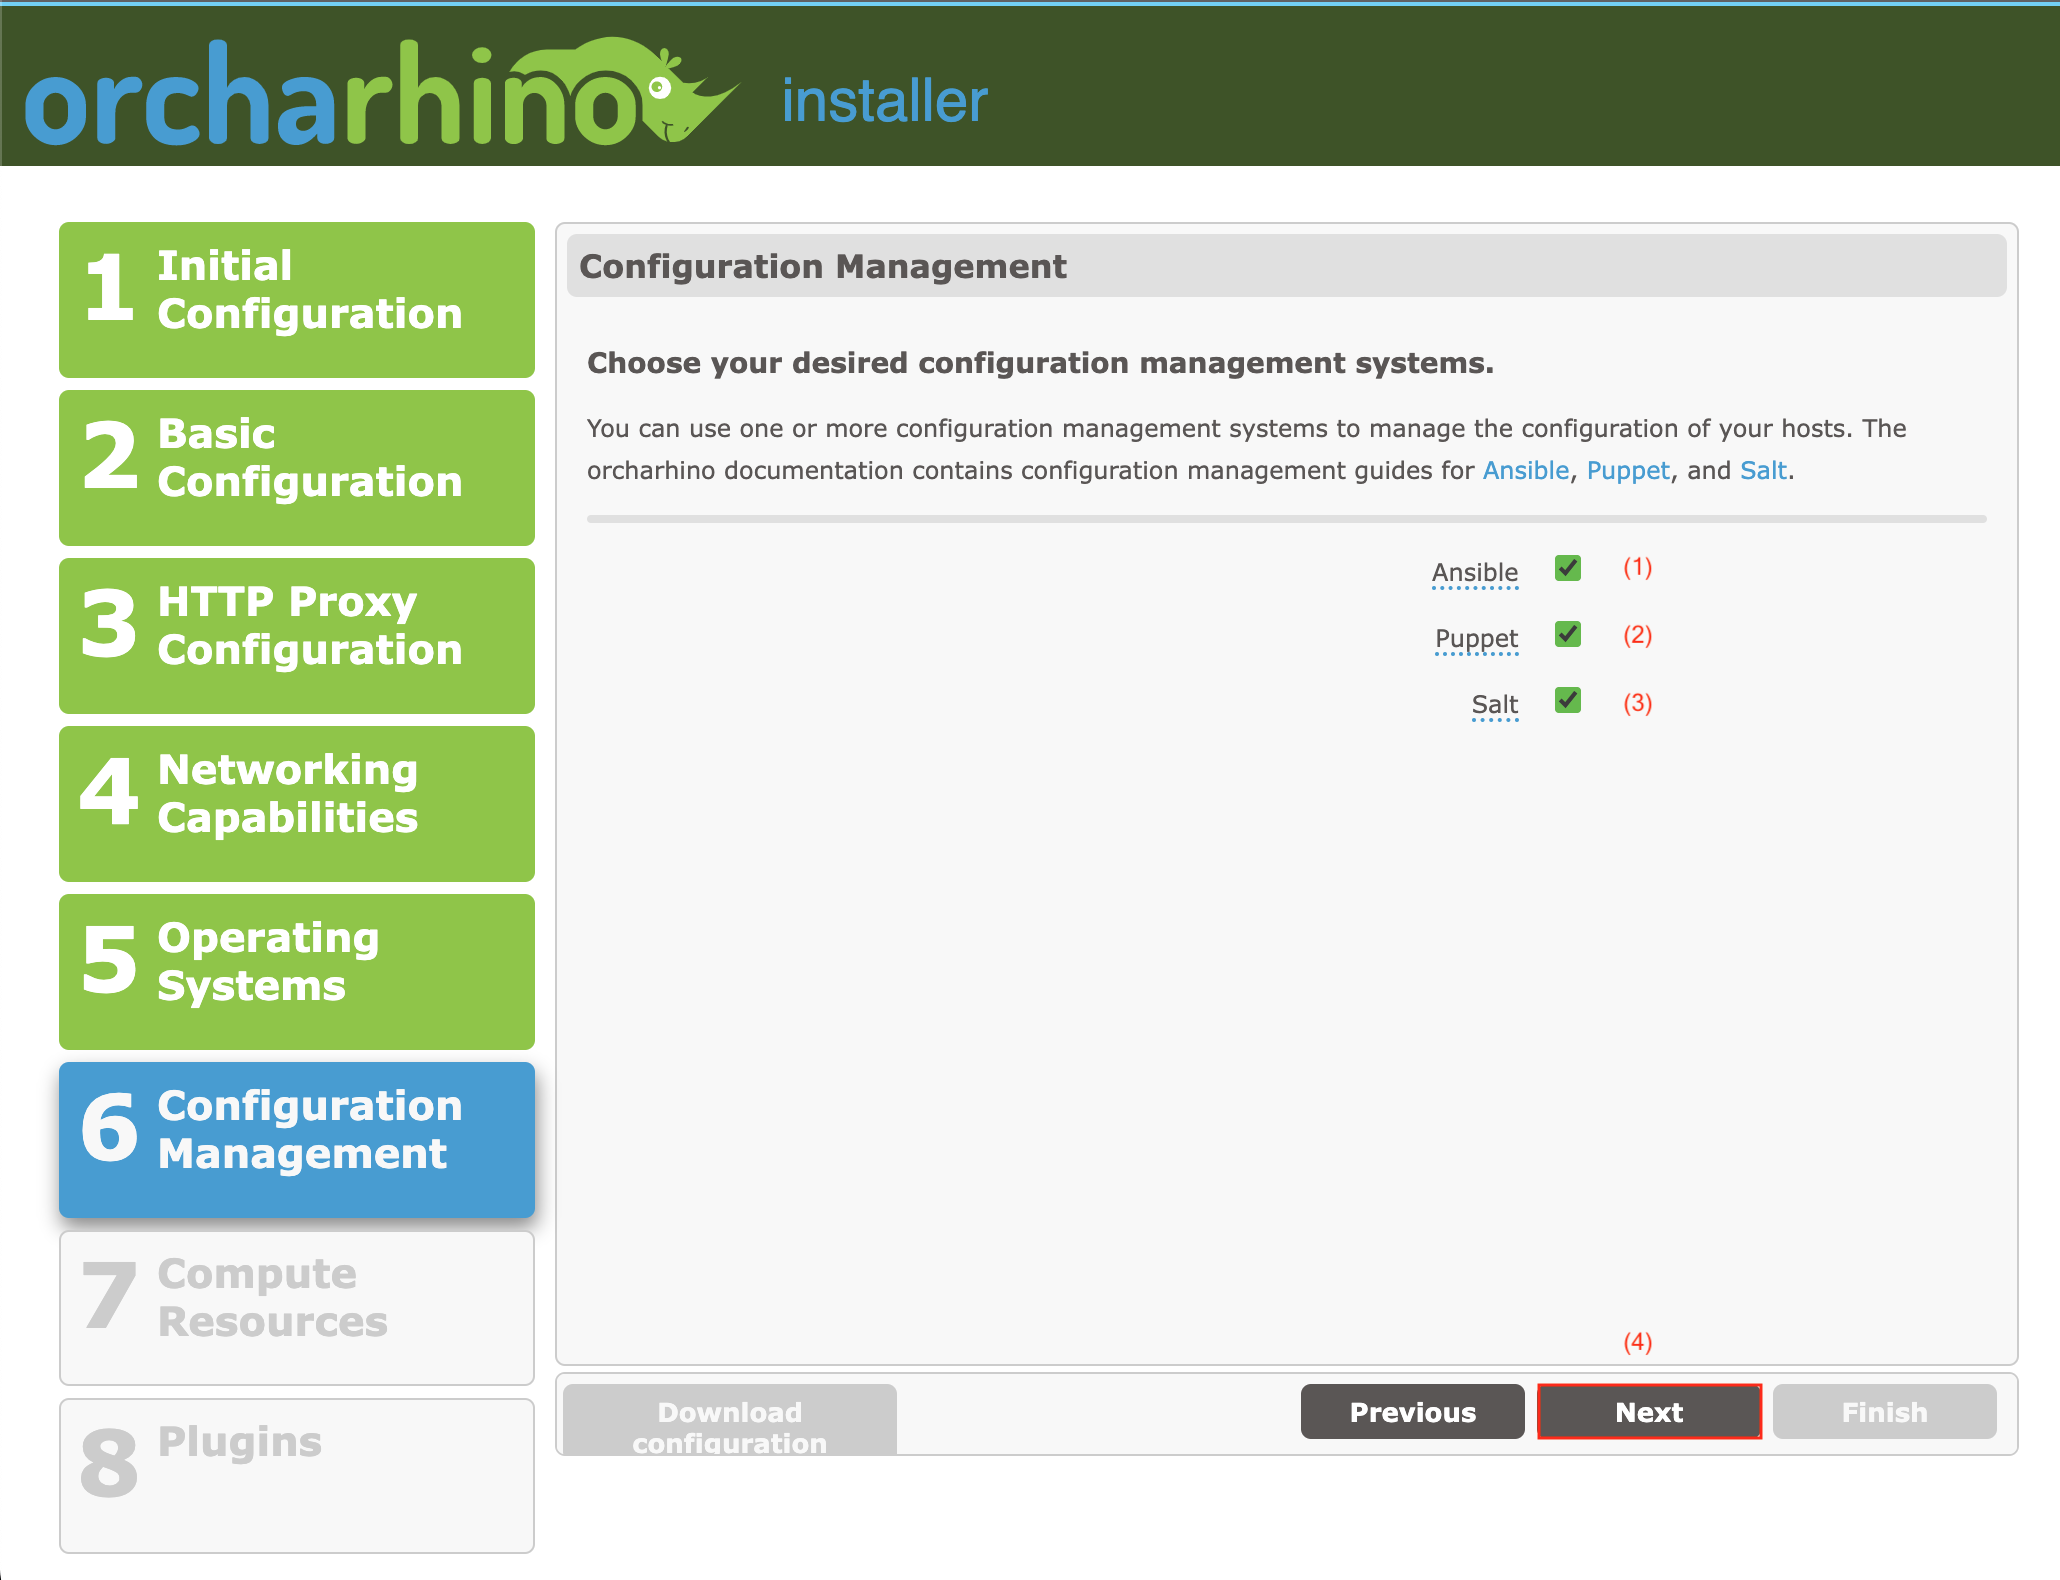 Selecting configuration management solutions in orcharhino Installer GUI